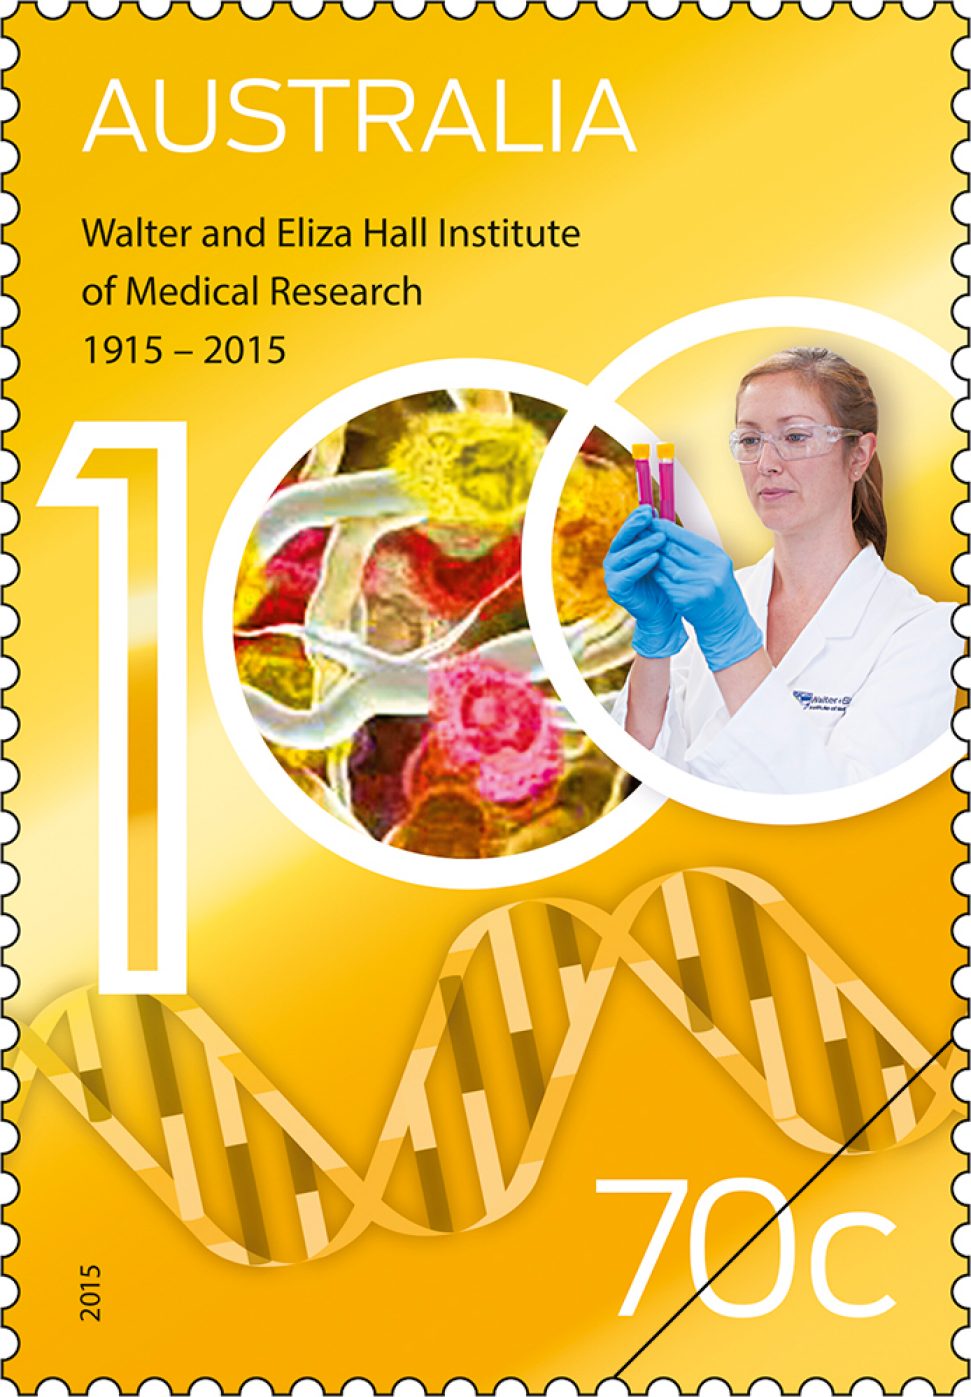 70 cent stamp - Centenary of the Walter and Eliza Hall Institute of Medical Research 1915-2015